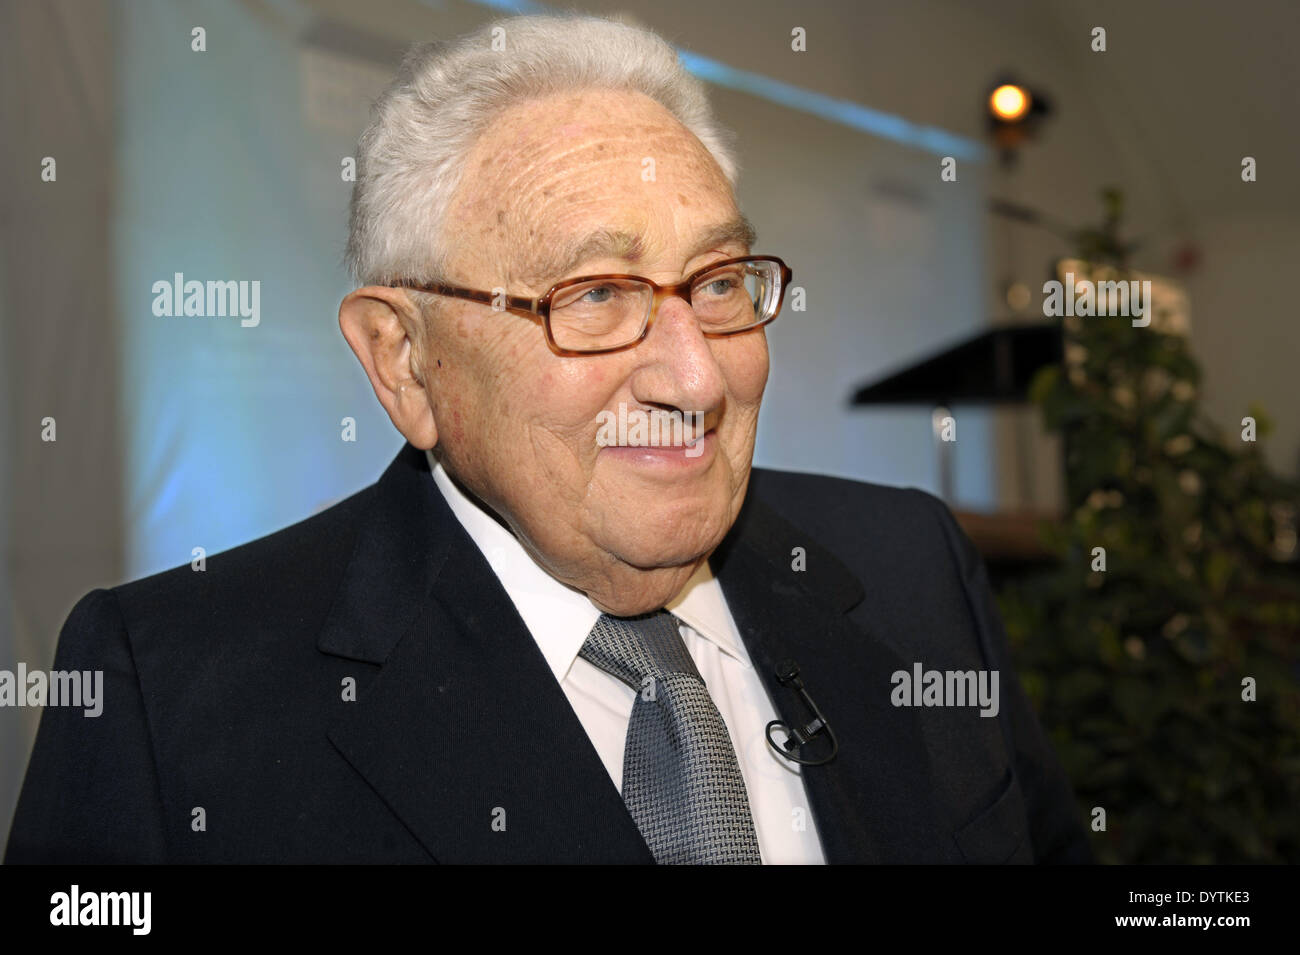 Kissinger High Resolution Stock Photography and Images - Alamy